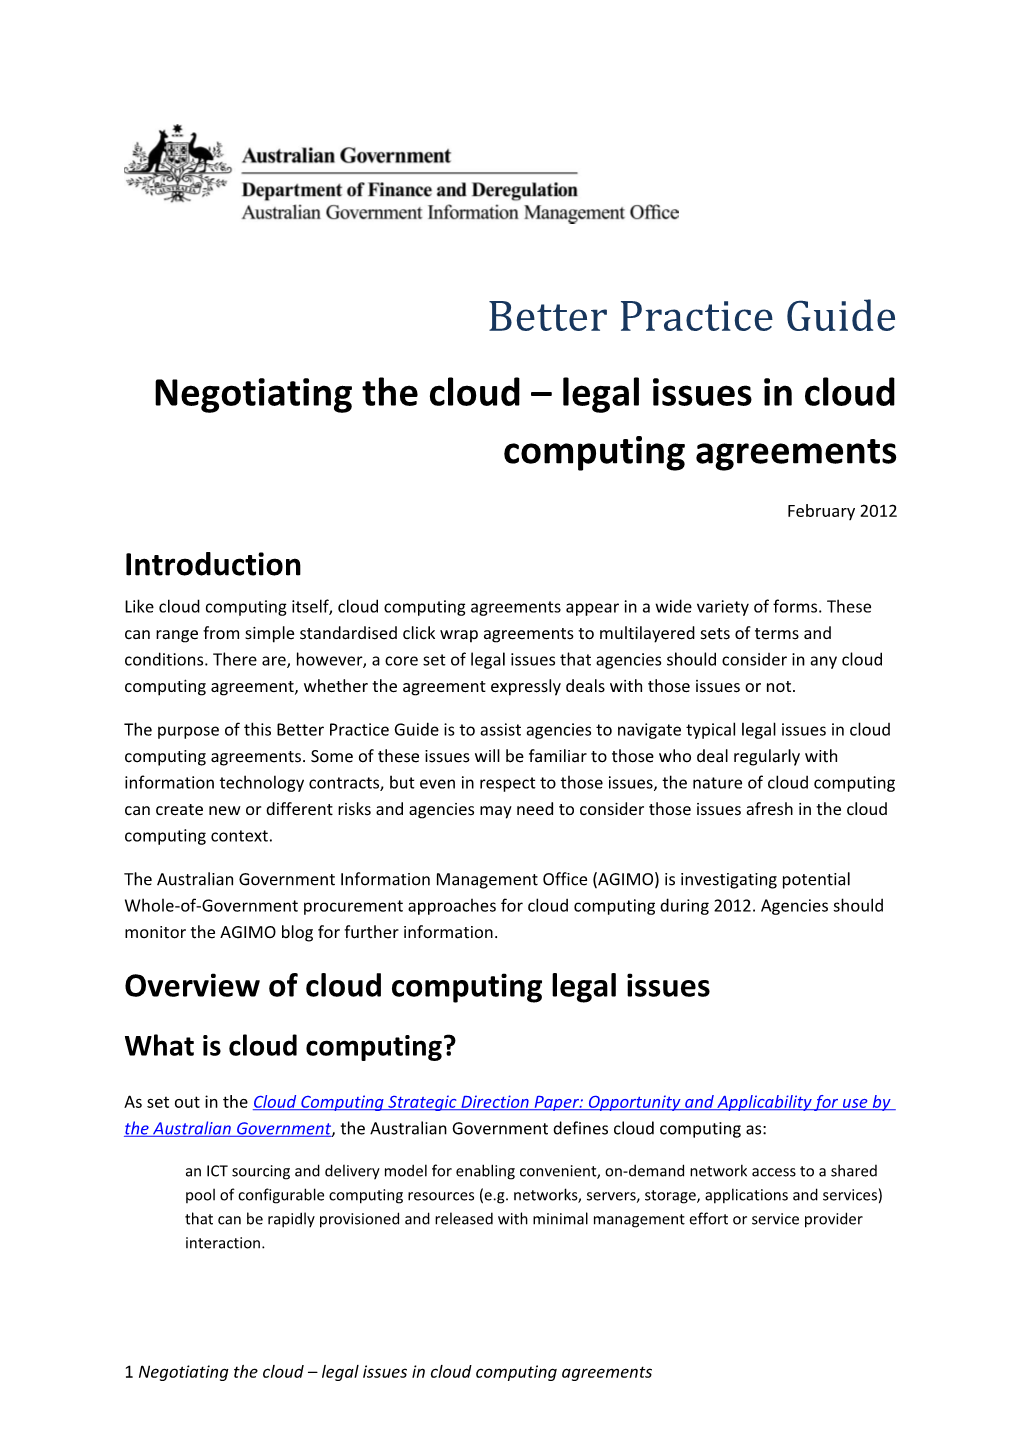 Negotiating the Cloud Legal Issues in Cloud Computing Agreements